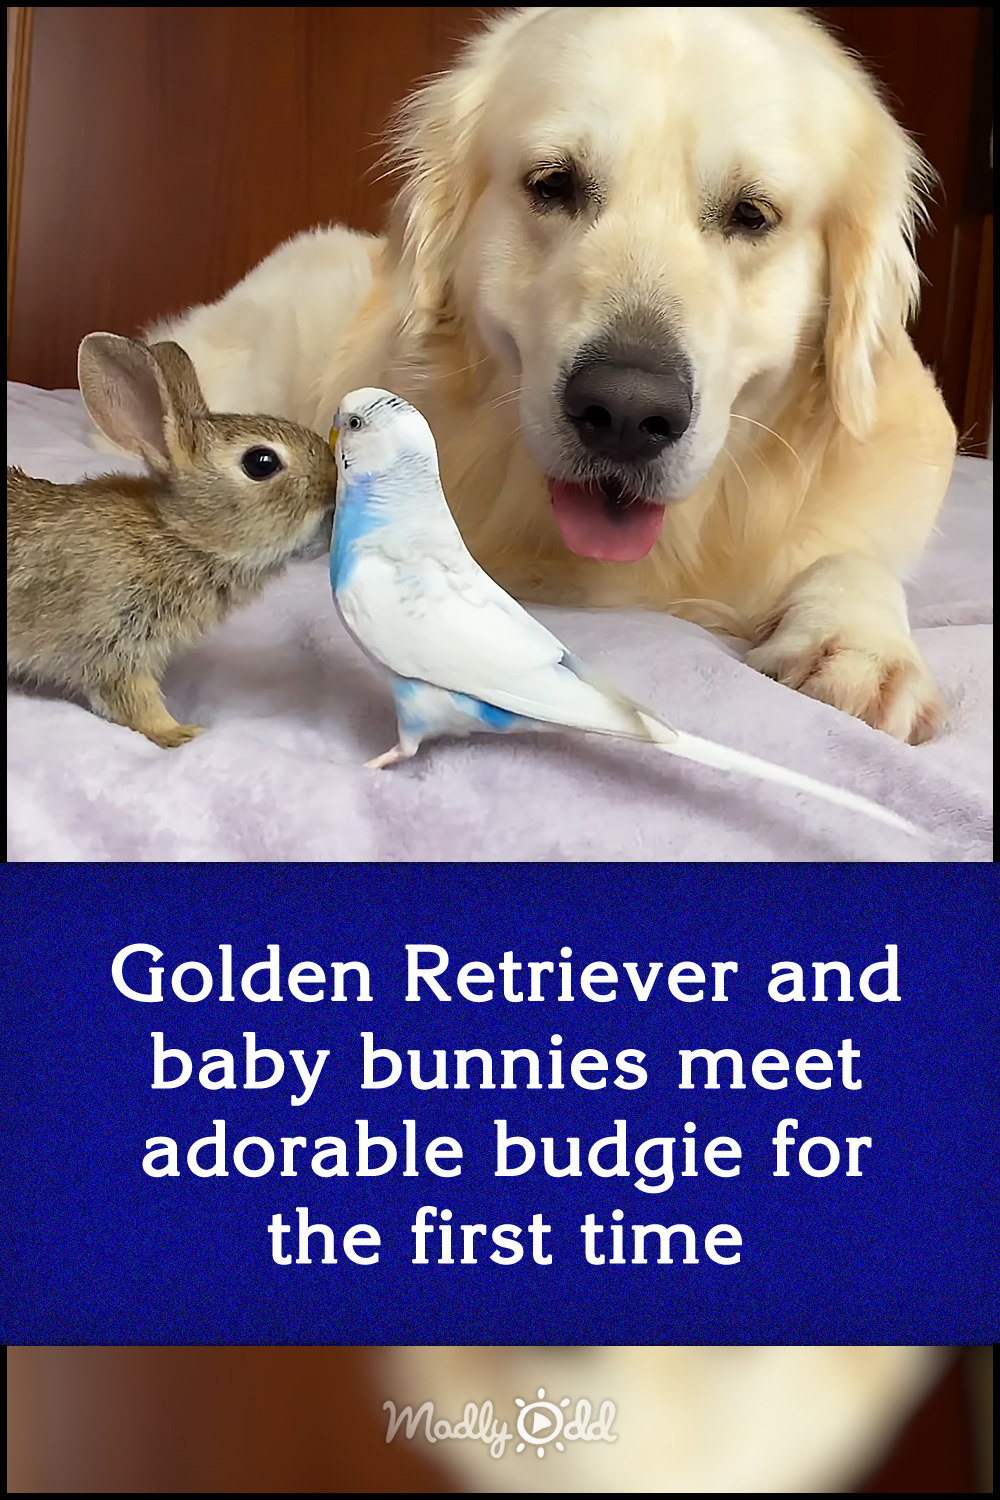 Golden Retriever and baby bunnies meet adorable budgie for the first time